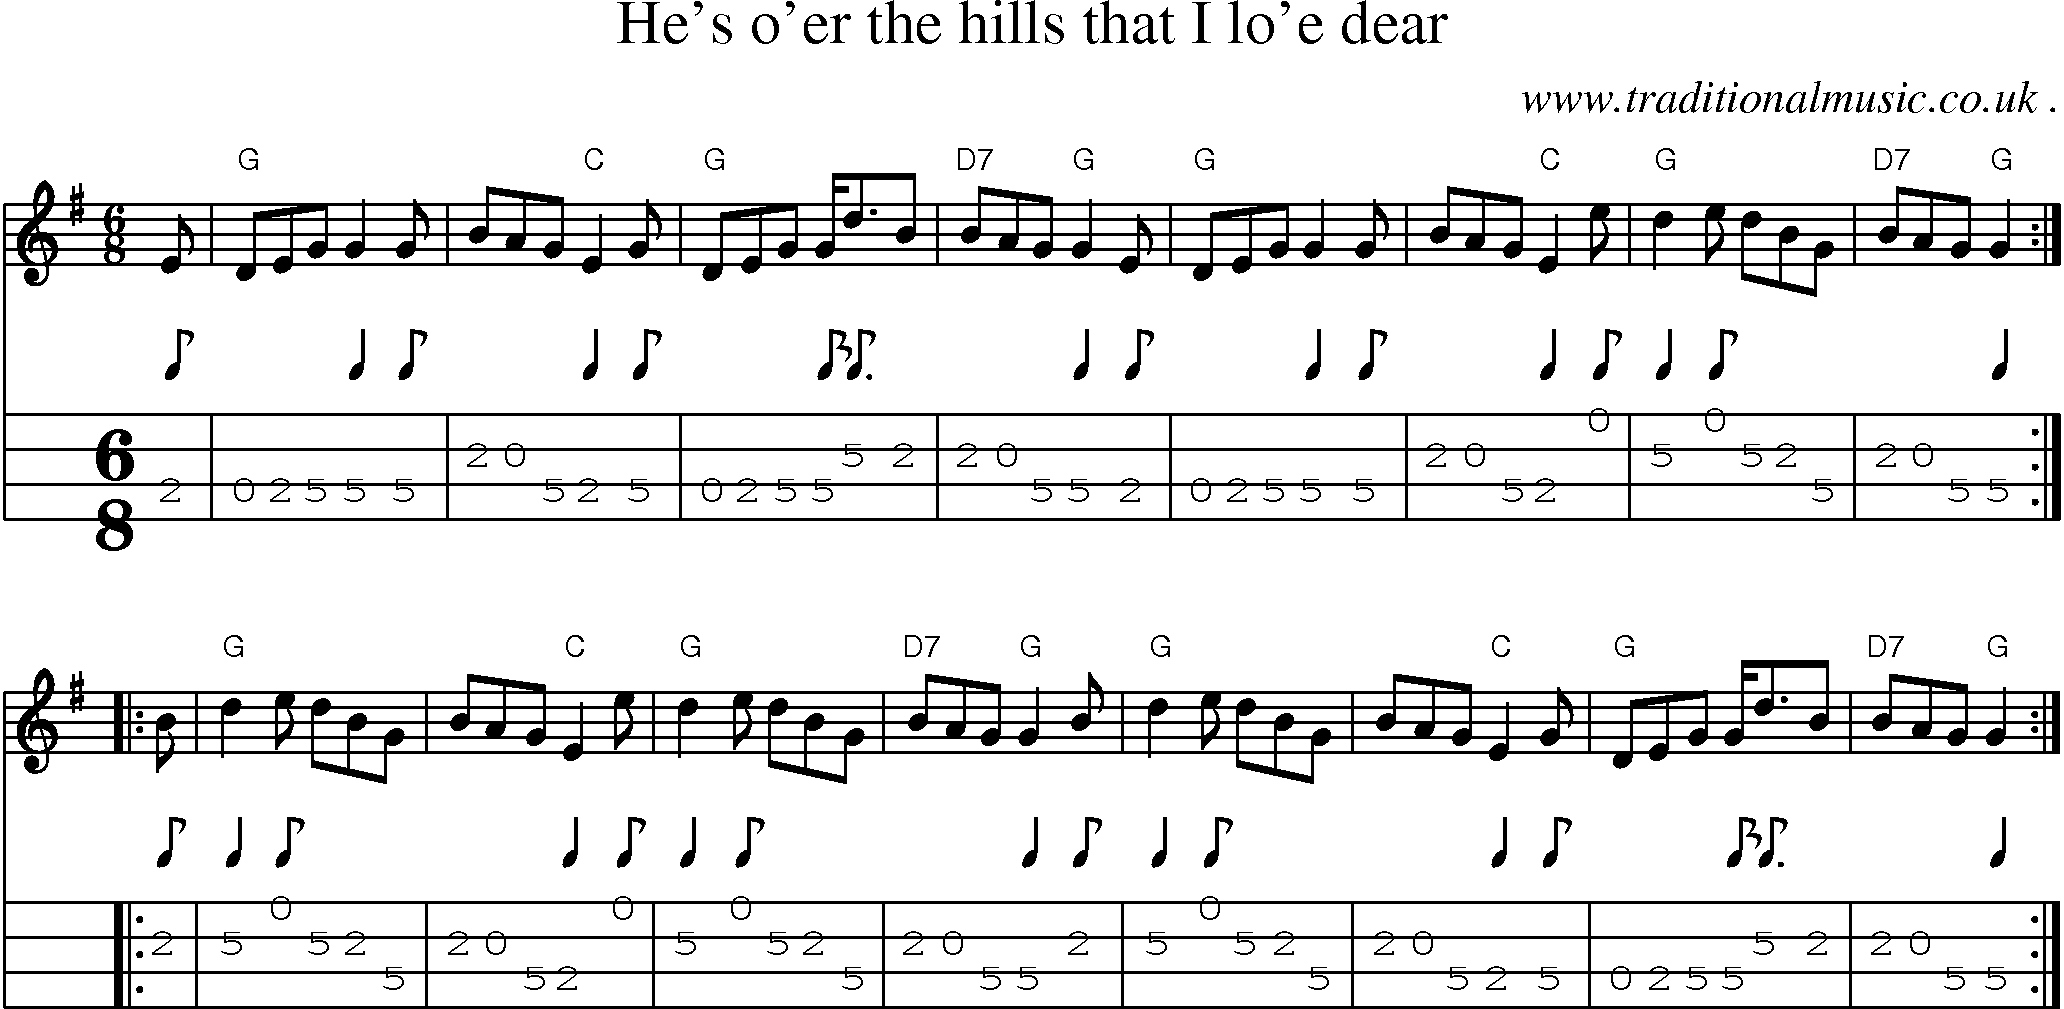 Sheet-music  score, Chords and Mandolin Tabs for Hes Oer The Hills That I Loe Dear